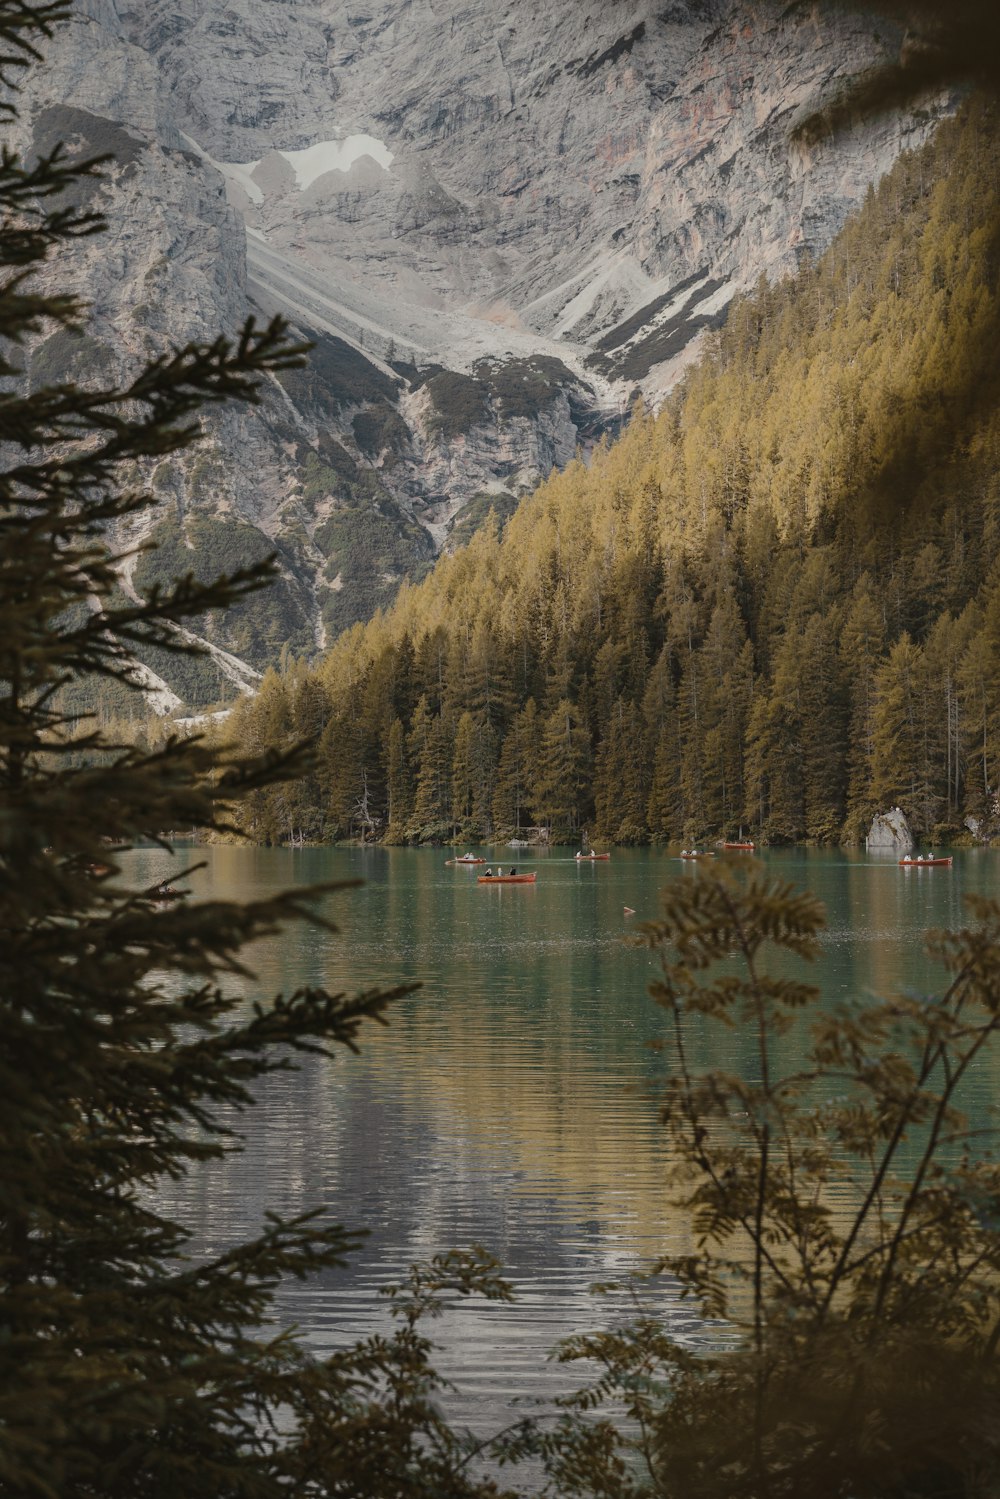 a lake surrounded by mountains and trees